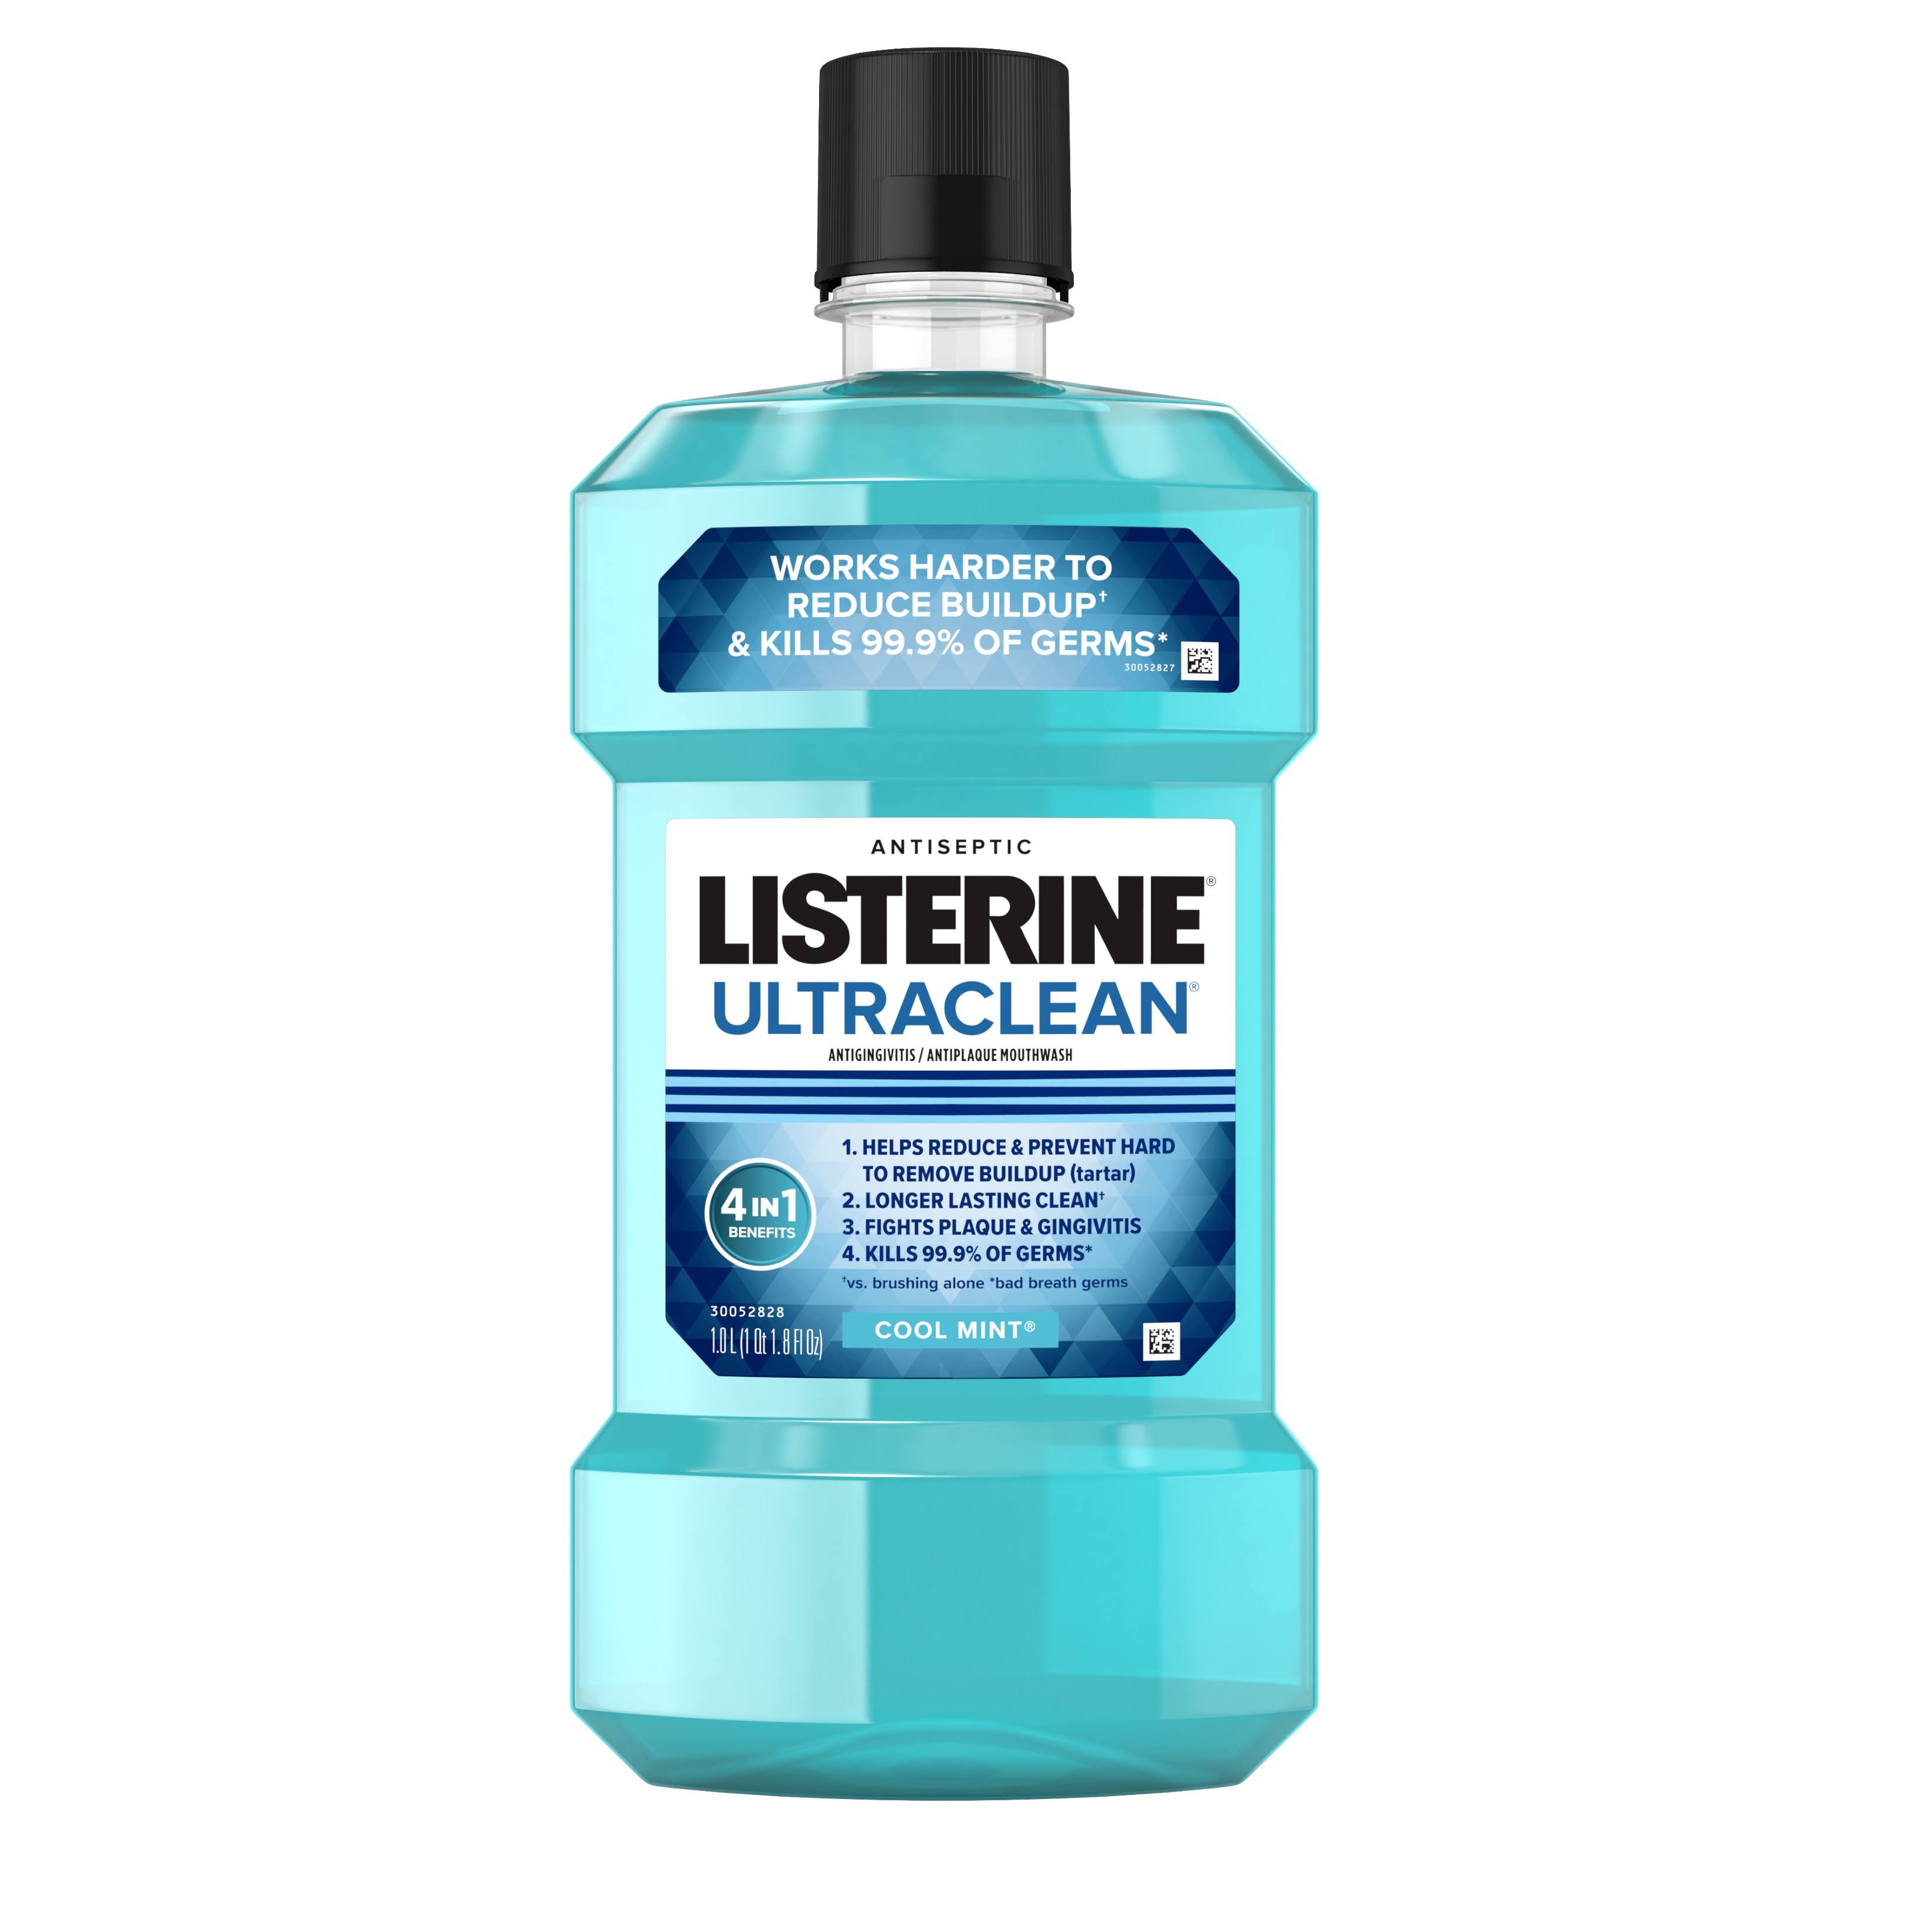 Listerine Ultra Clean Antiseptic Mouthwash - Cool Mint, 1l